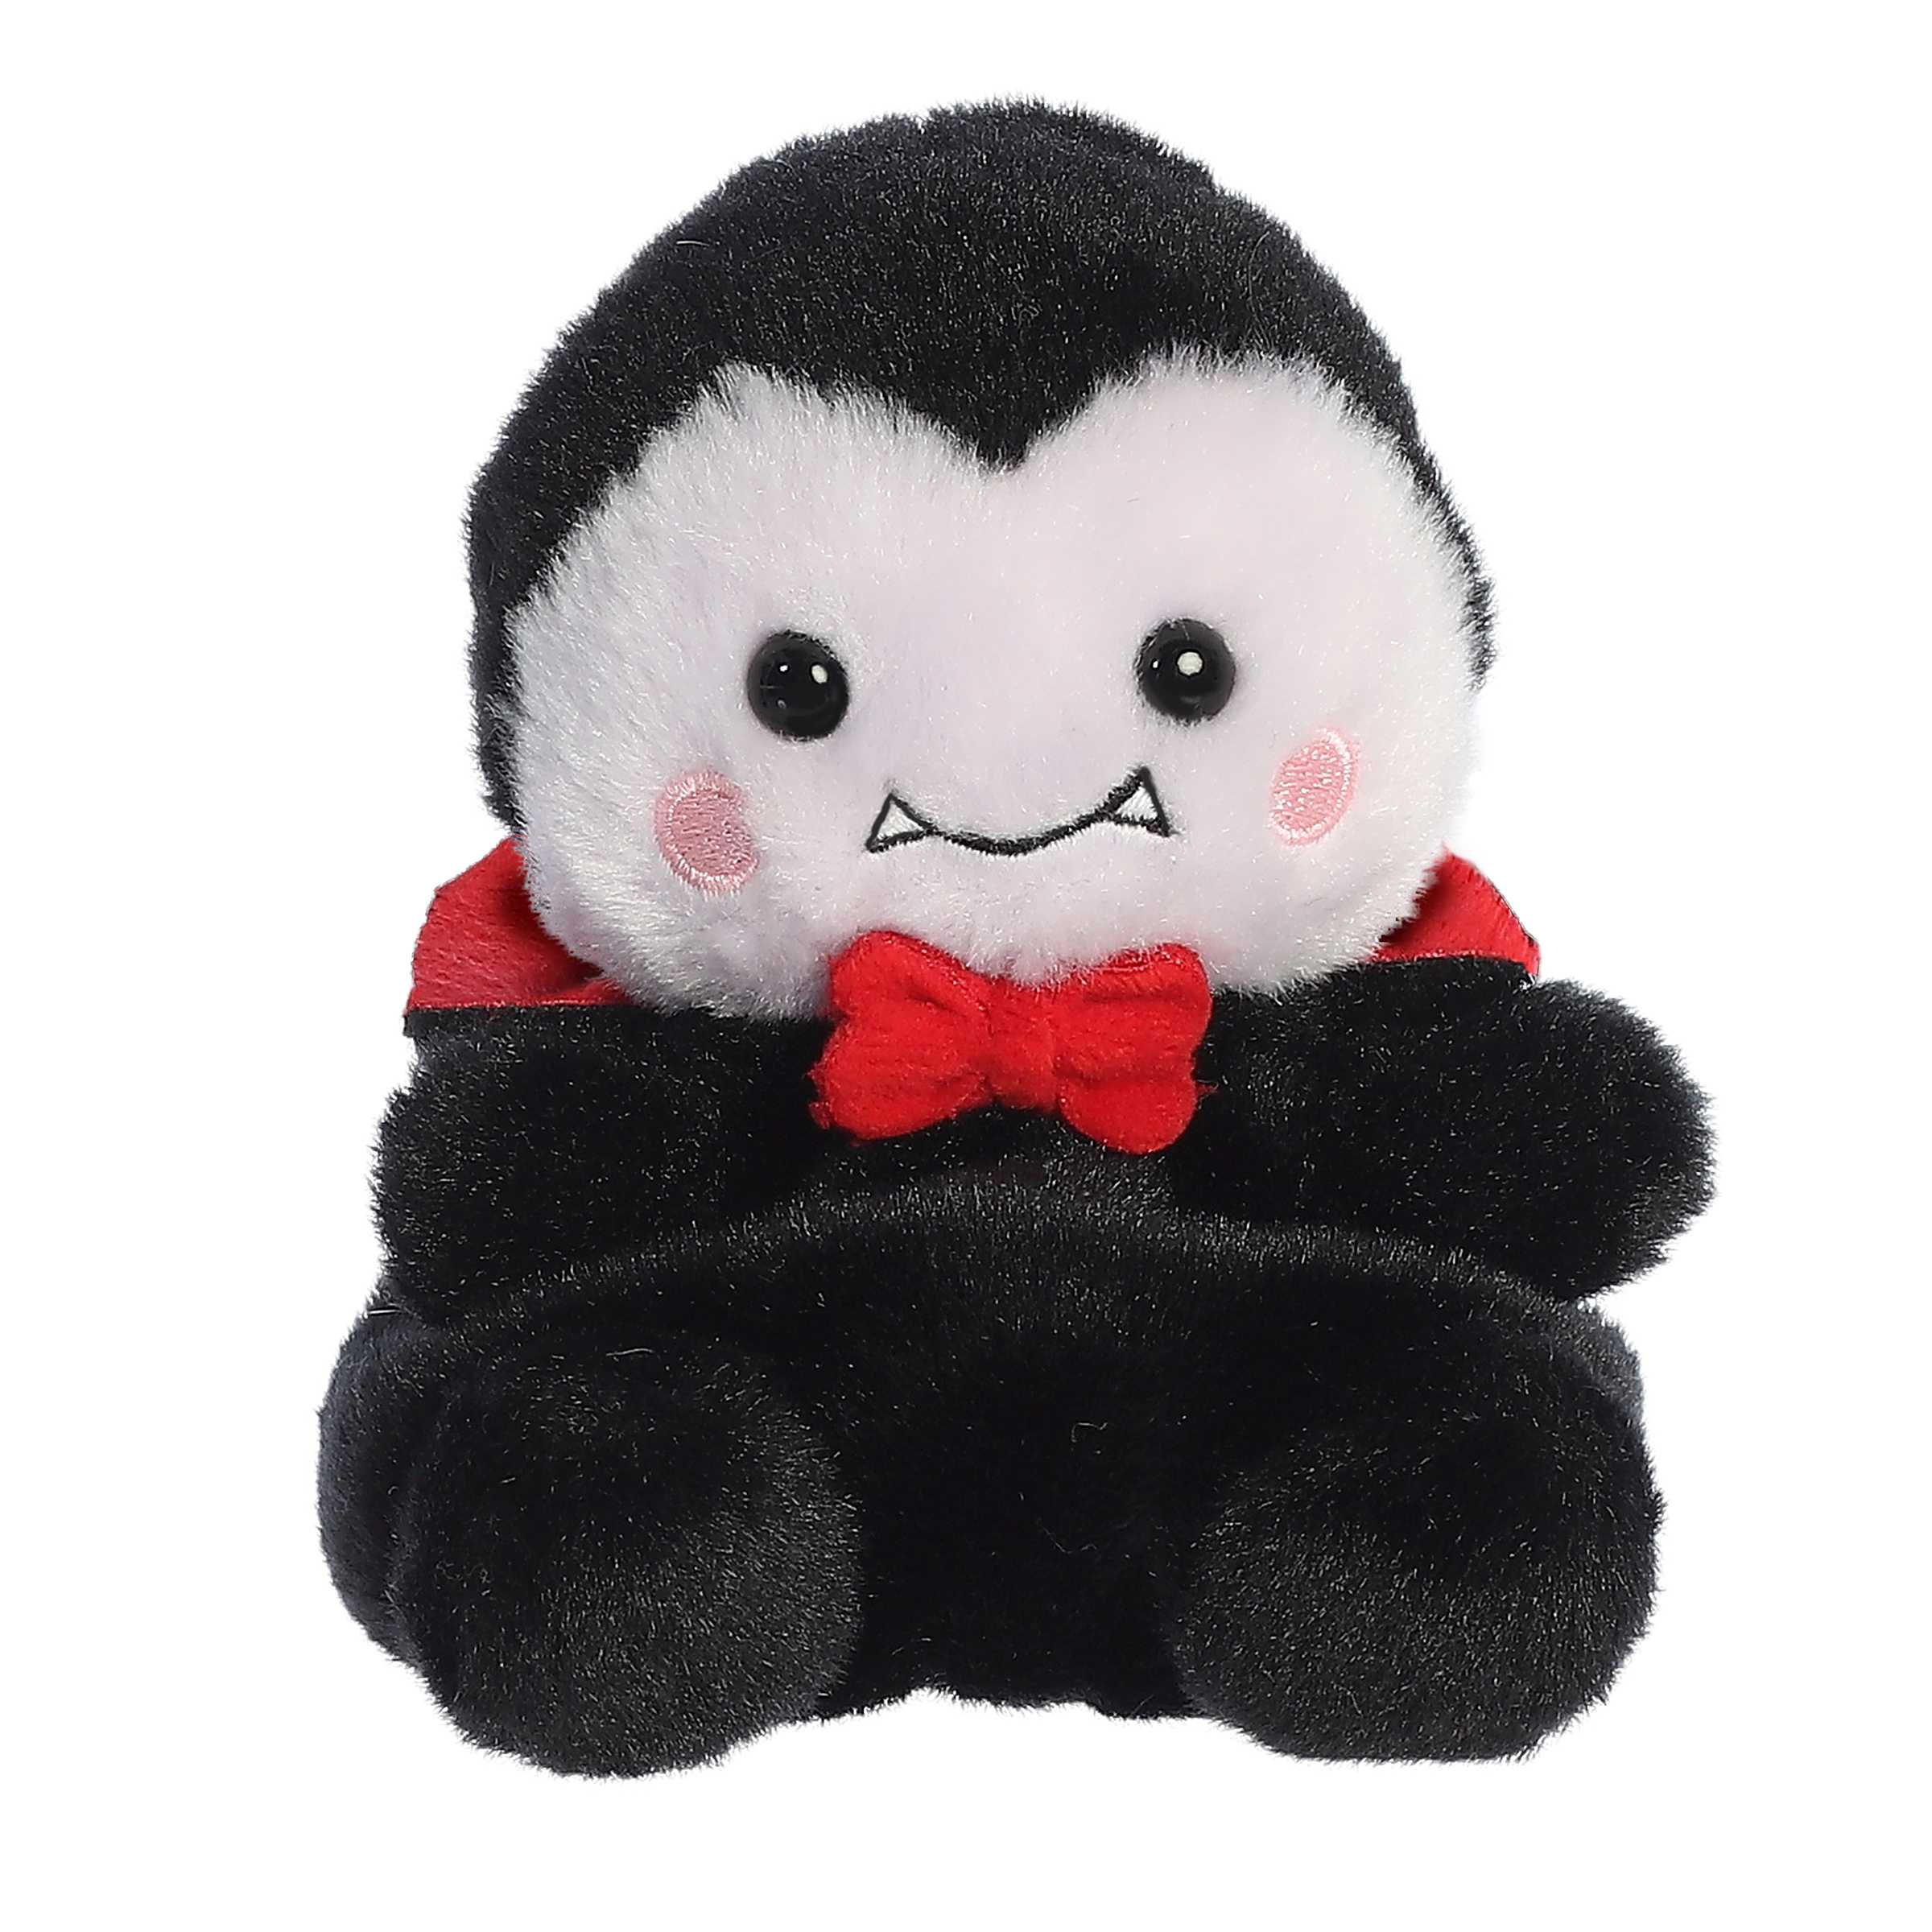 Spooky sitting vampire stuffed animal adorned with a dashing red bow tie, black body, and embroidered fangs